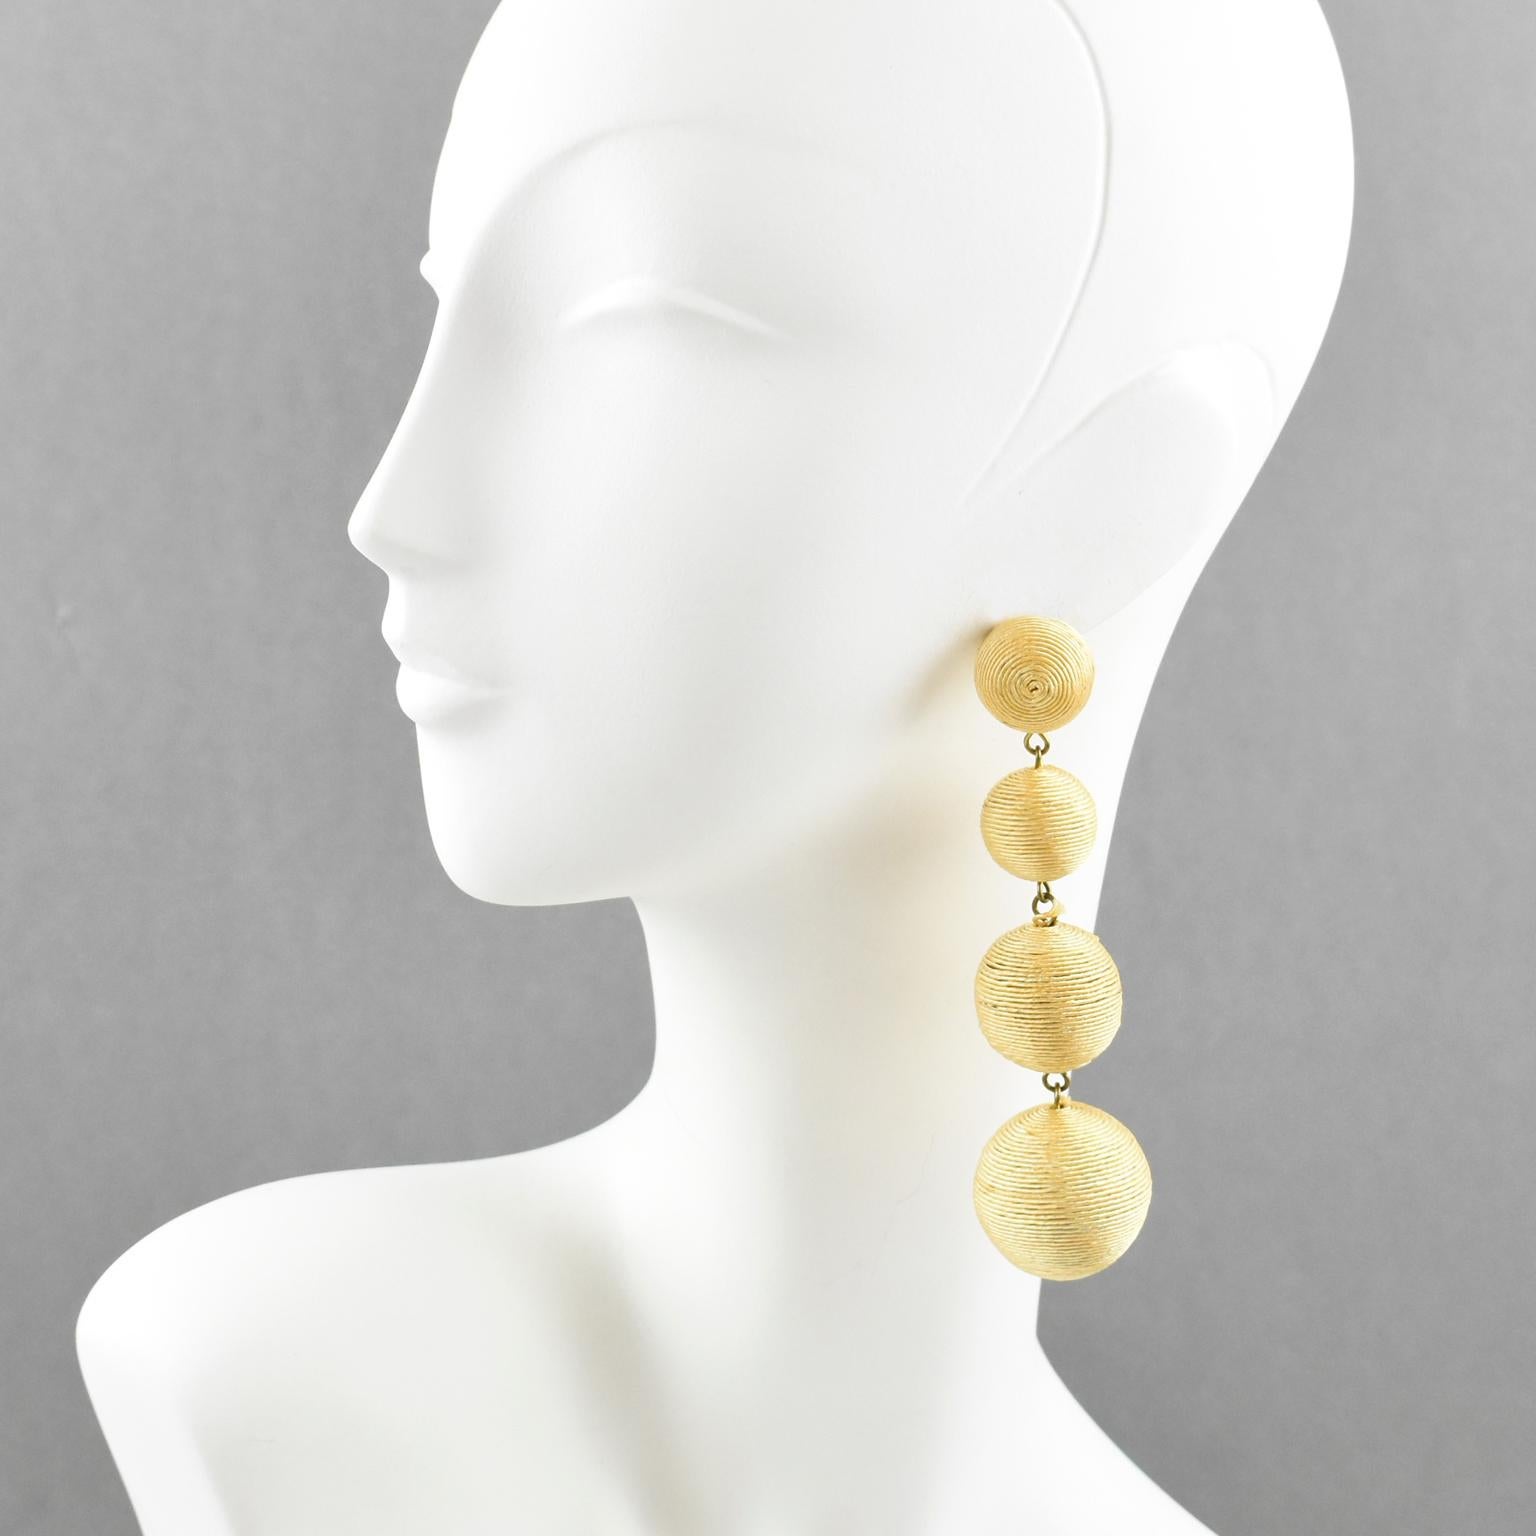 Disco perfection, these pierced earrings have a vintage look. Oversized chandelier dangle shape with graduated ball elements all wrapped with yellow thread. There is no visible maker's mark. For pierced ears.
Measurements: 1.19 in. wide (3 cm) x